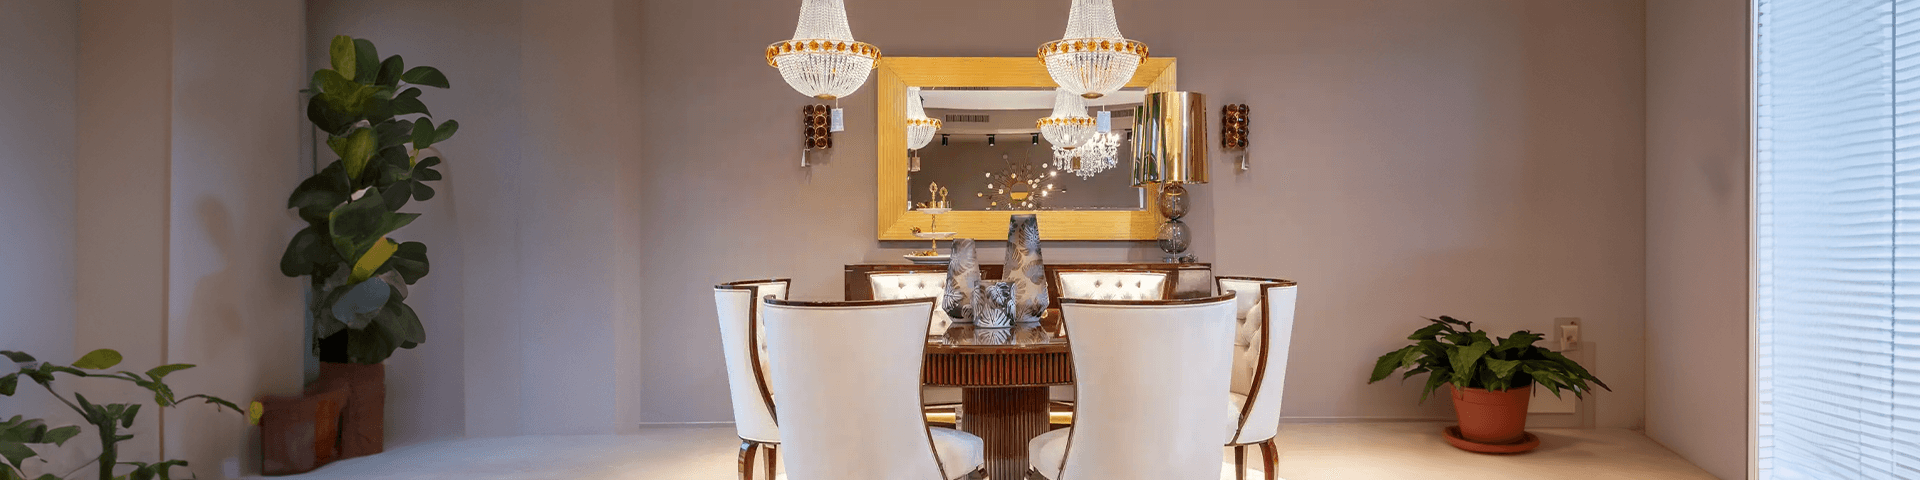 Dining room with chandelier